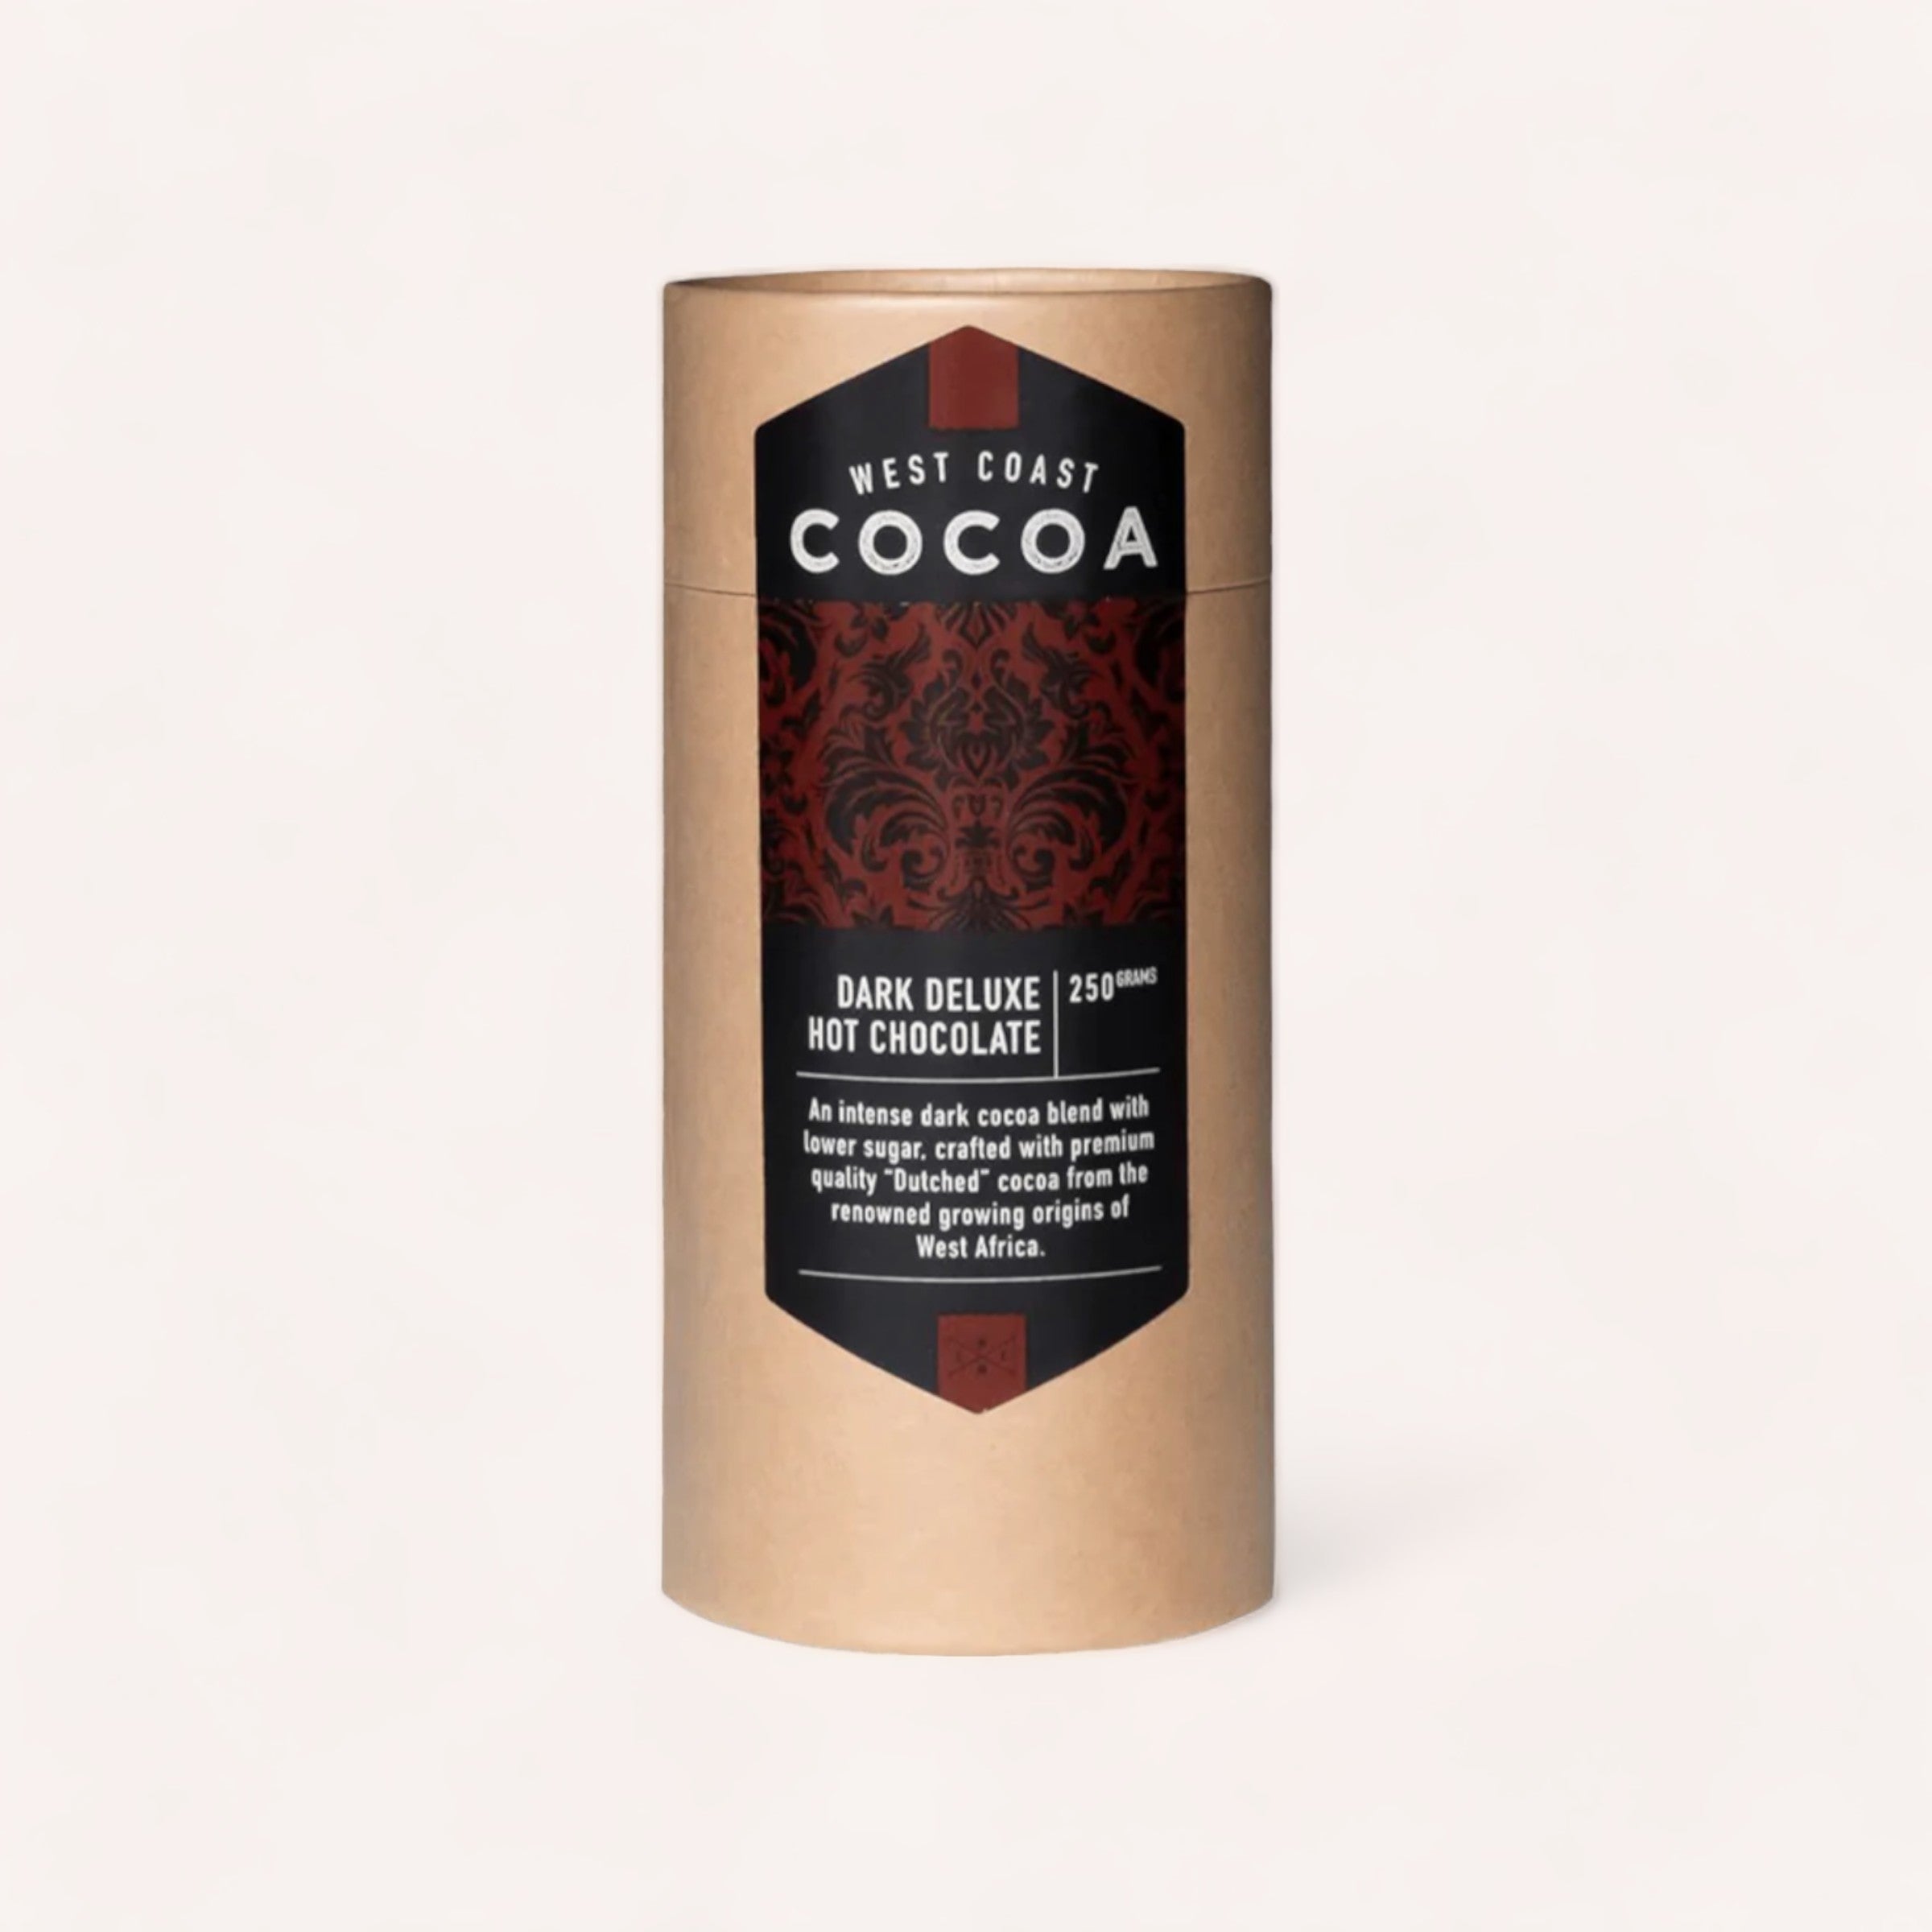 A cylindrical container of West Coast Cocoa Deluxe Dark Hot Chocolate 250g, with elegant packaging design, emphasizing its premium quality cocoa blend sourced from West Africa.